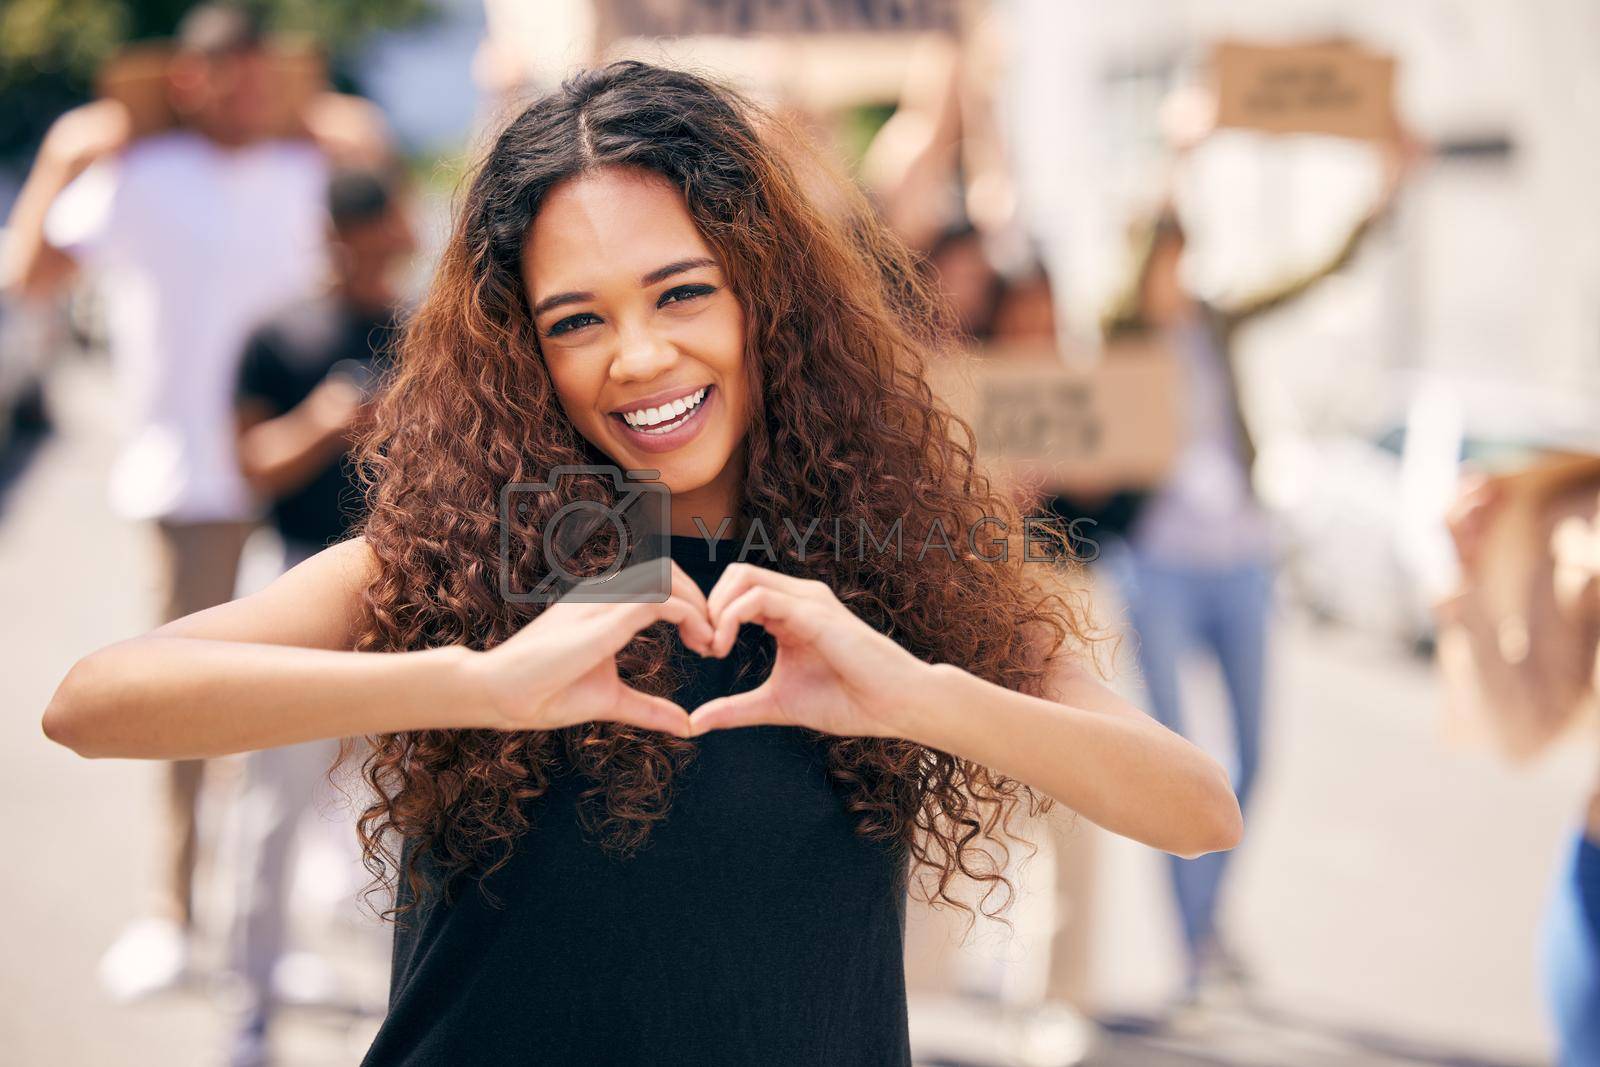 Royalty free image of Spreading love not hate. a young female protestor forming a heart shape at a protest rally. by YuriArcurs